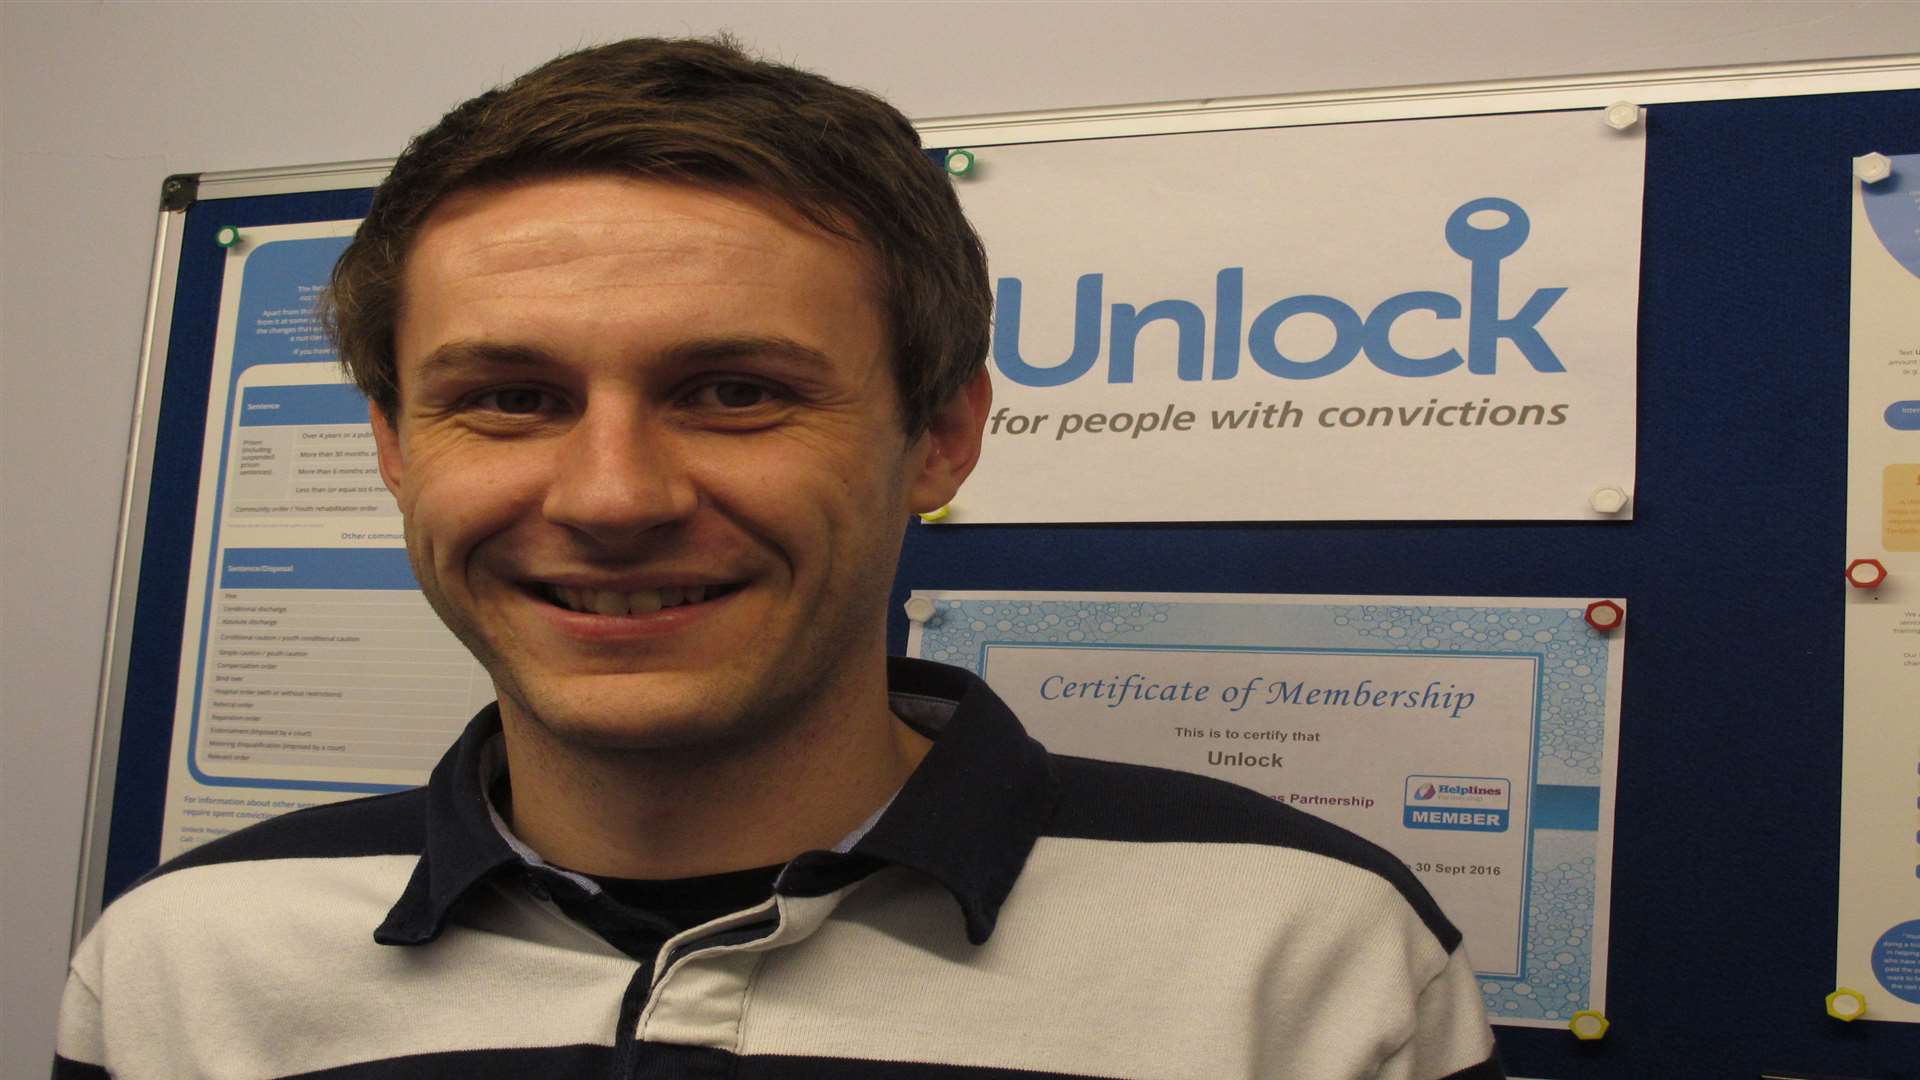 Christopher Stacey, co-director of Unlock, a charity for people with criminal convictions